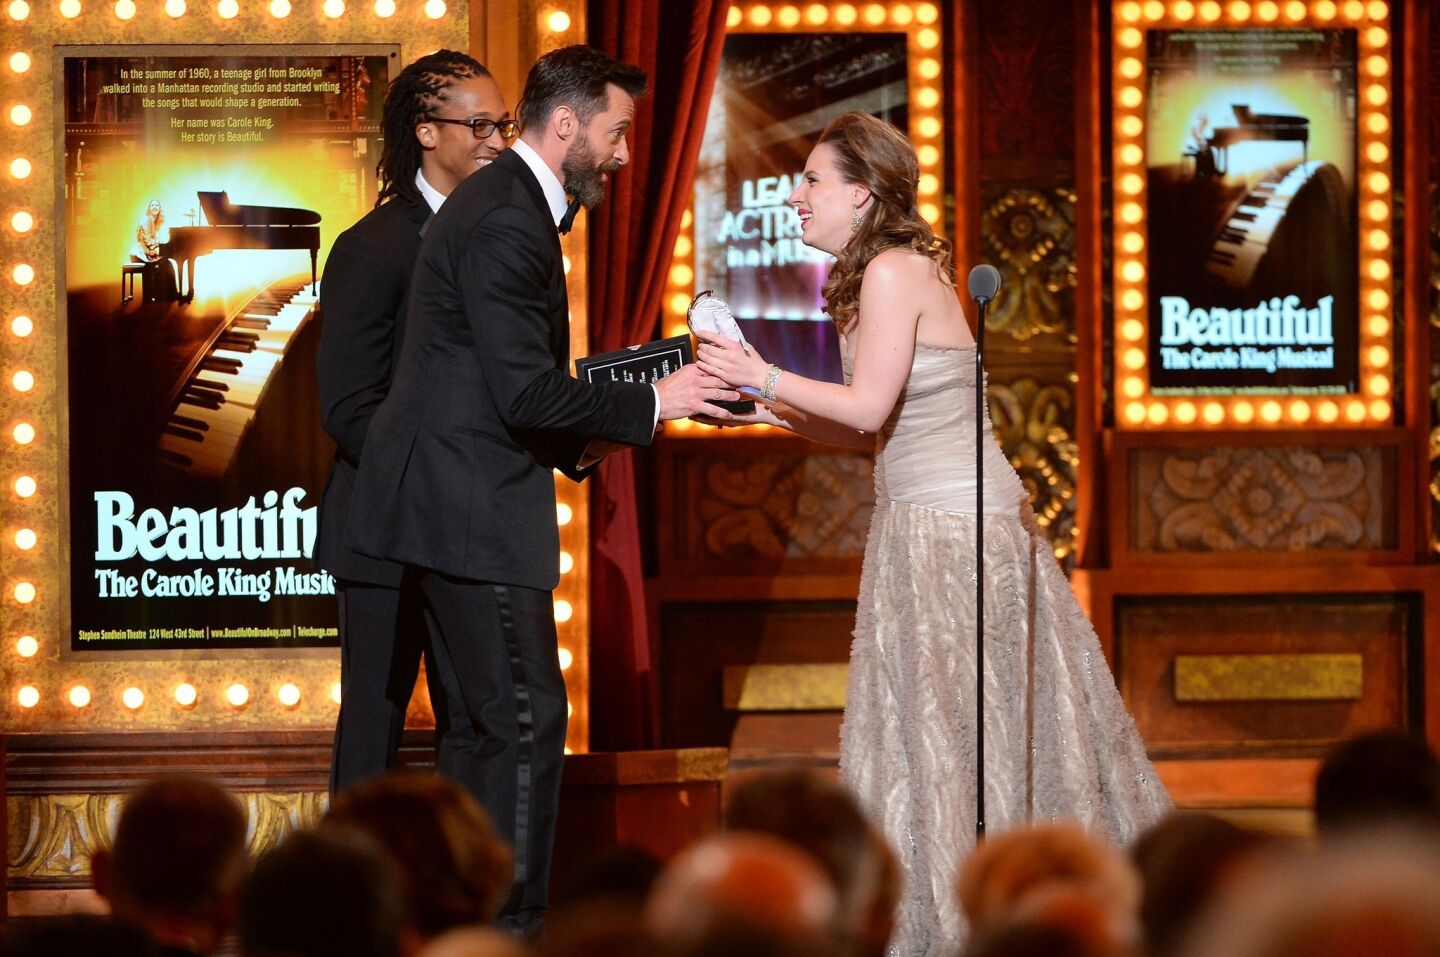 Hugh Jackman presents Jessie Mueller with the award for best performance by an actress in a leading role in a musical for "Beautiful."